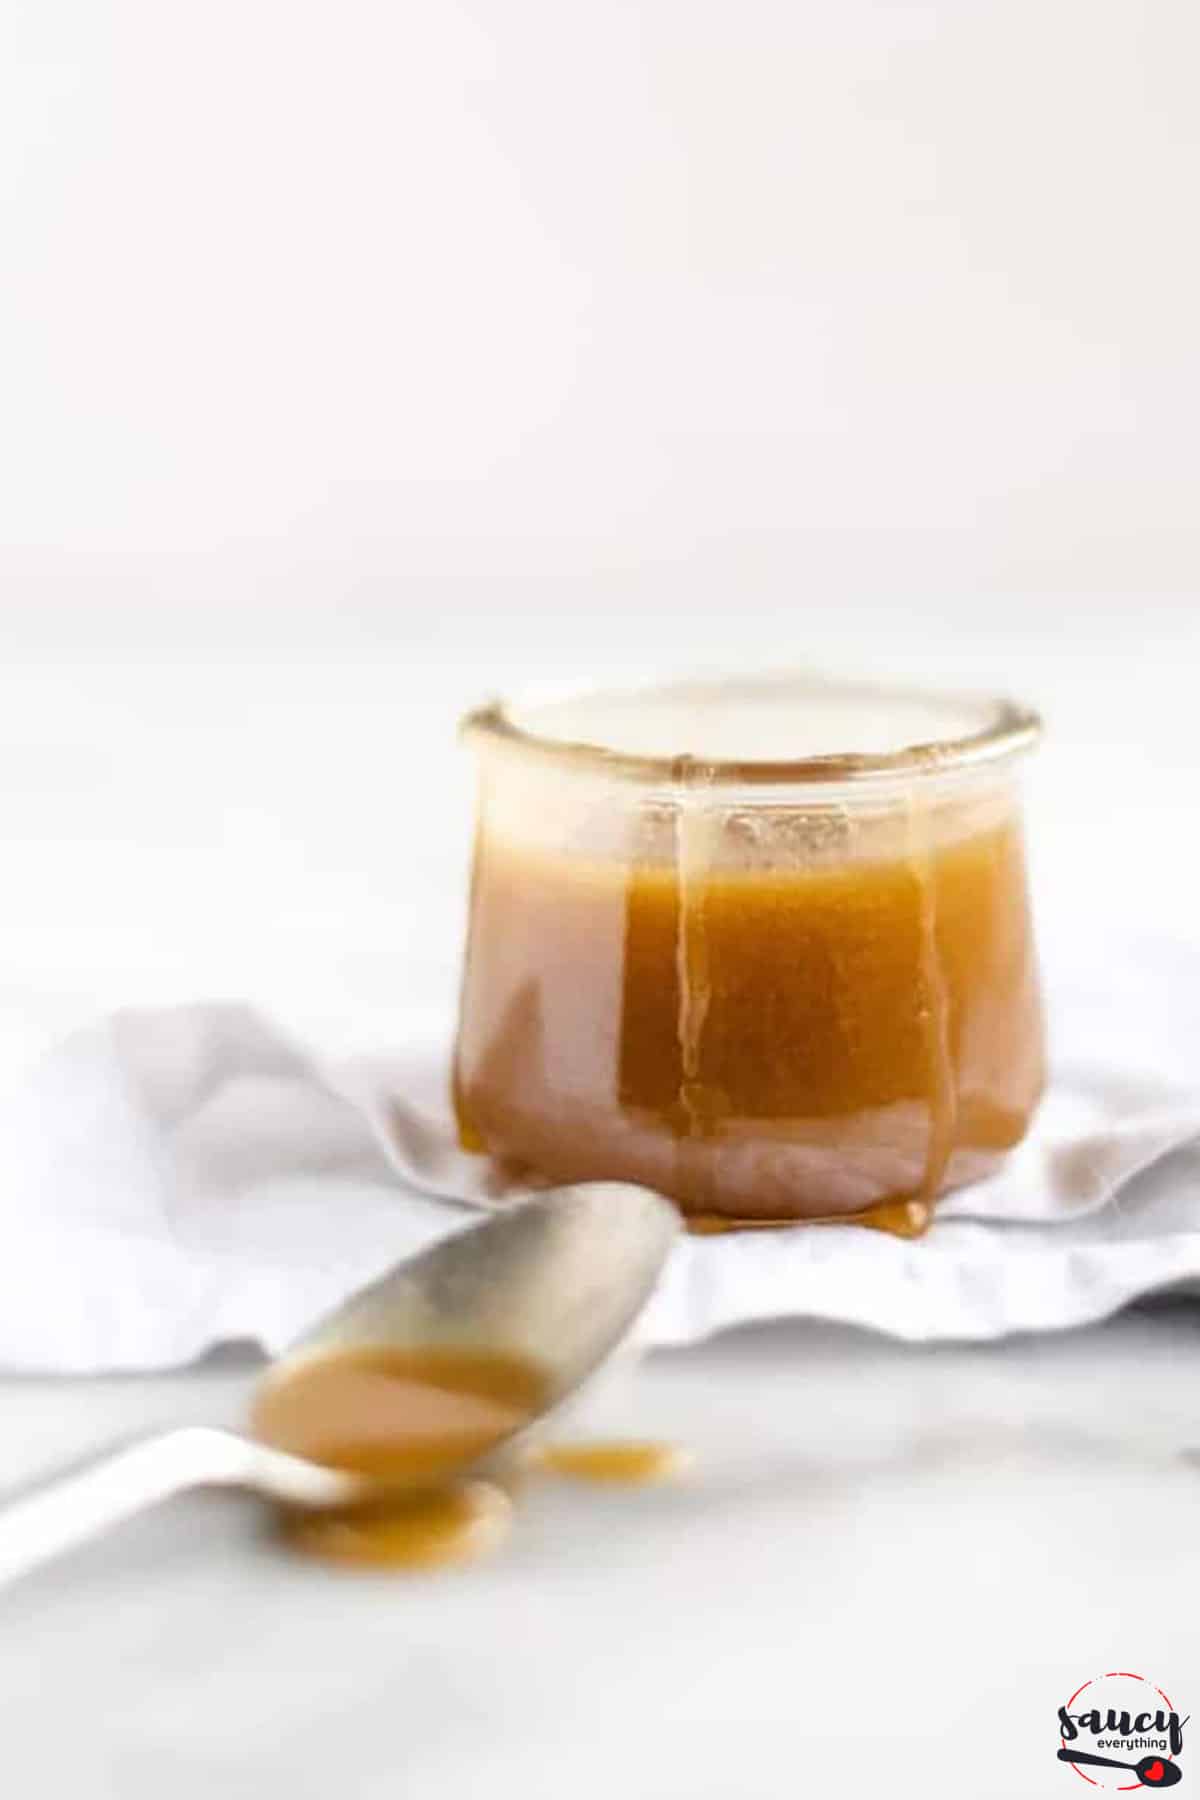 Butterscotch sauce in a jar next to a spoon